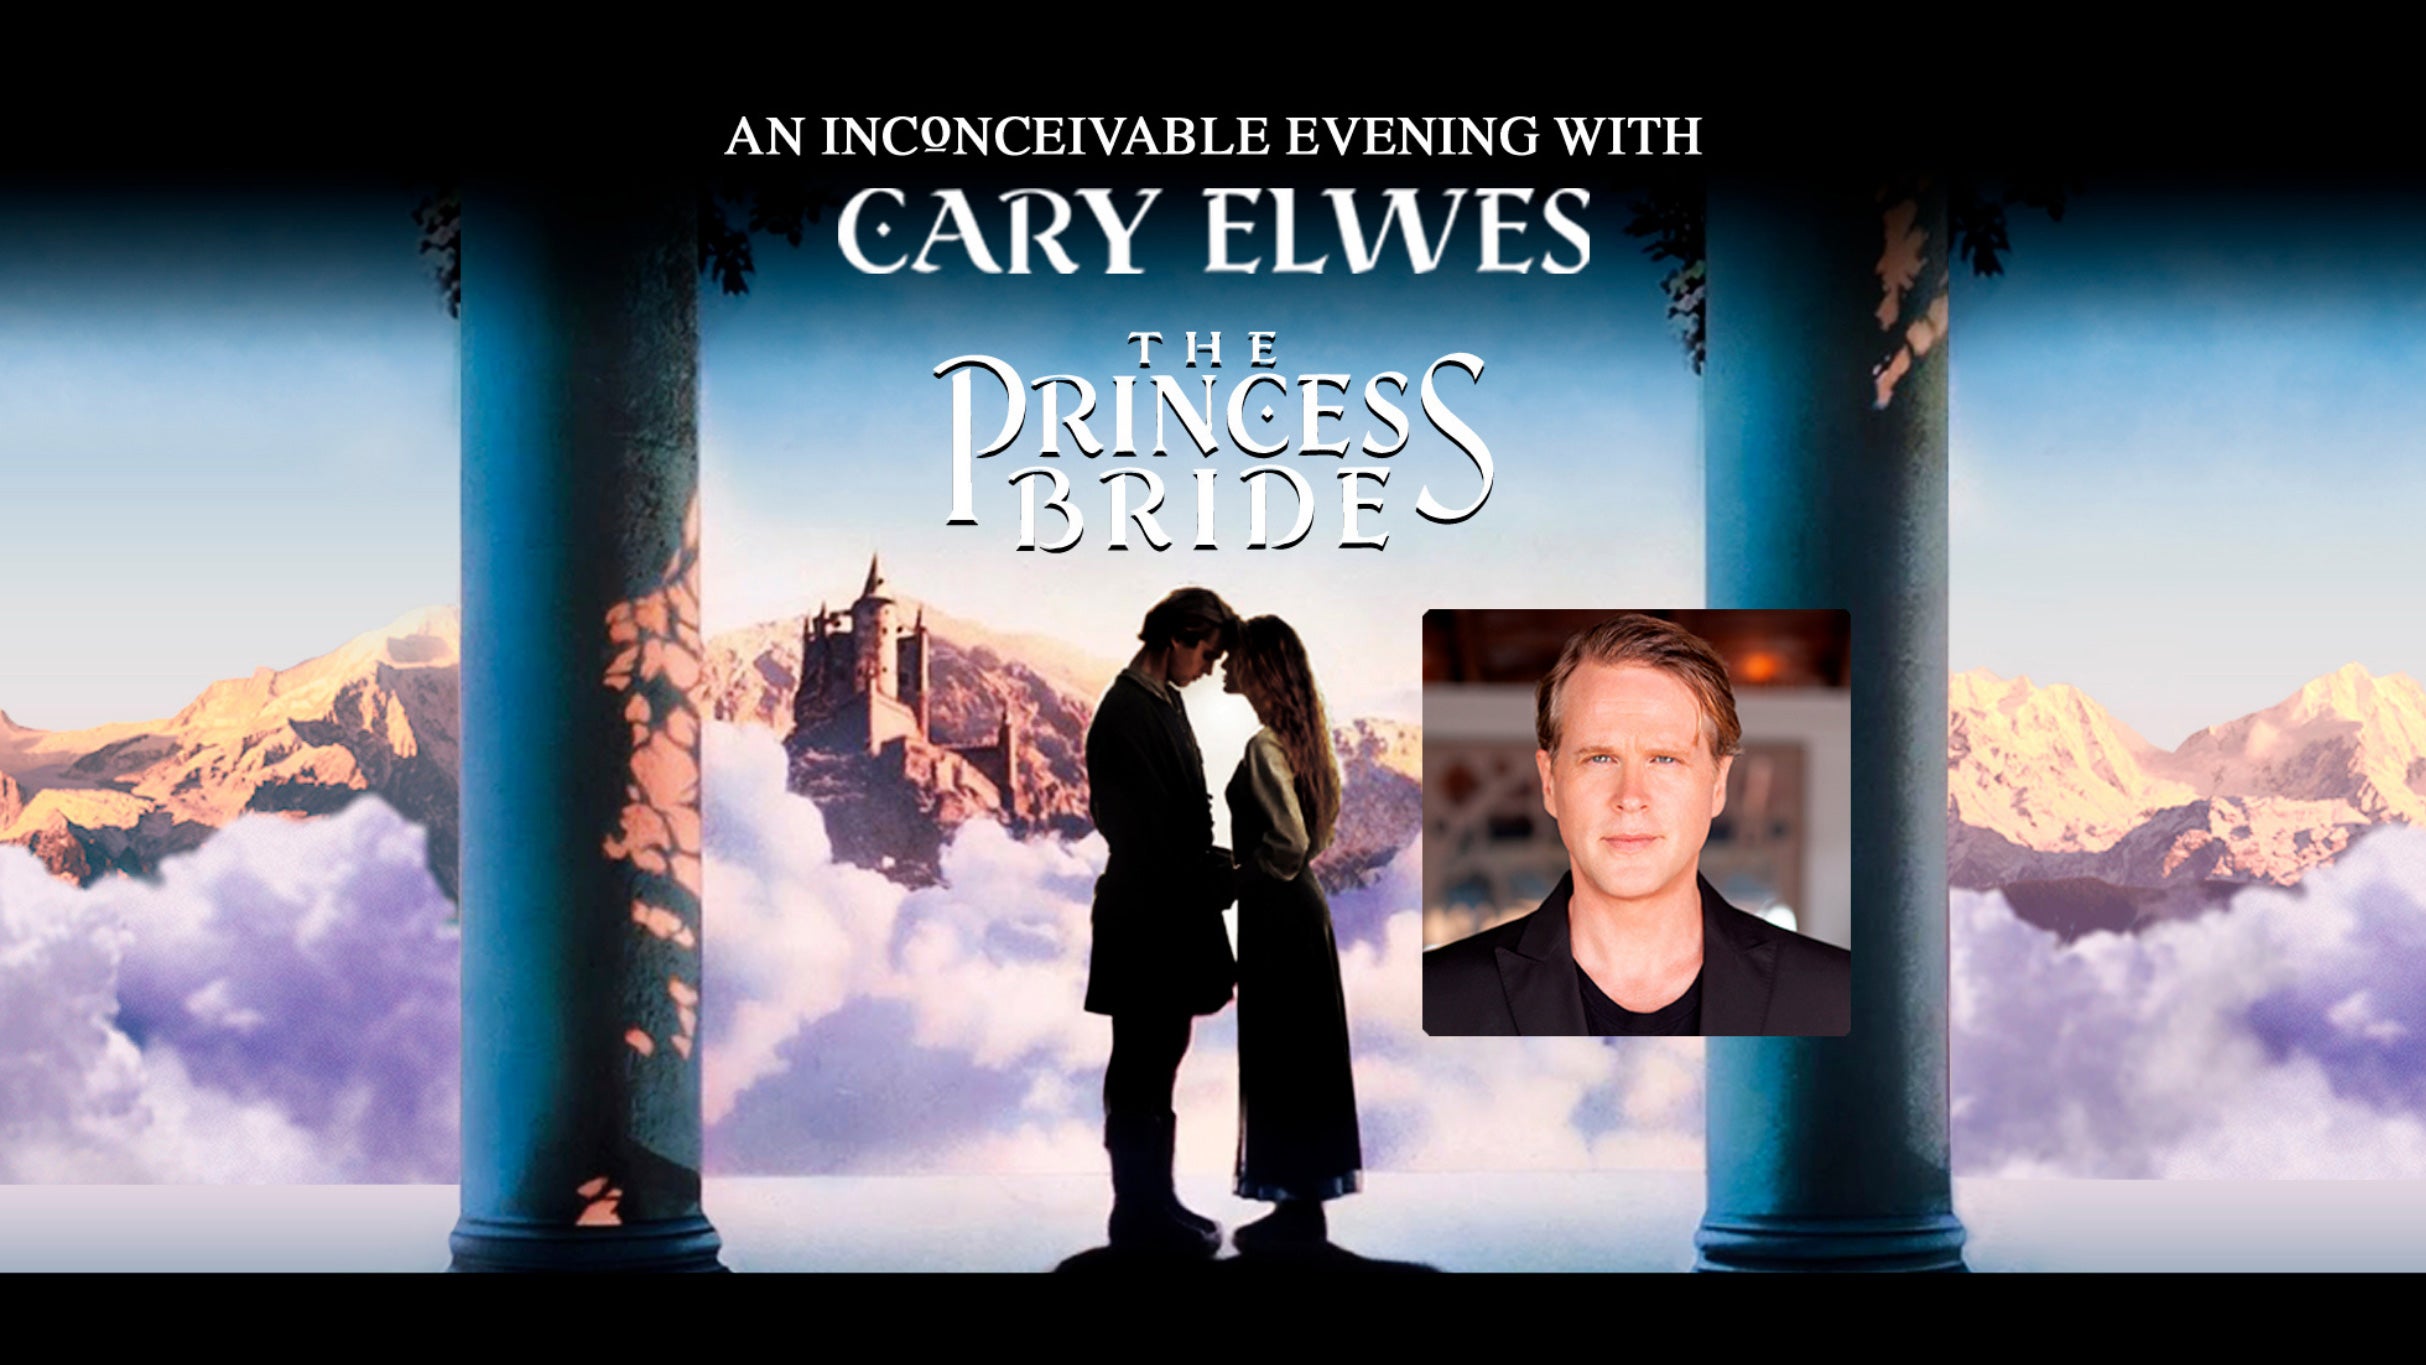 The Princess Bride: An Inconceivable Evening with Cary Elwes in Waukegan promo photo for Genesee Theatre presale offer code